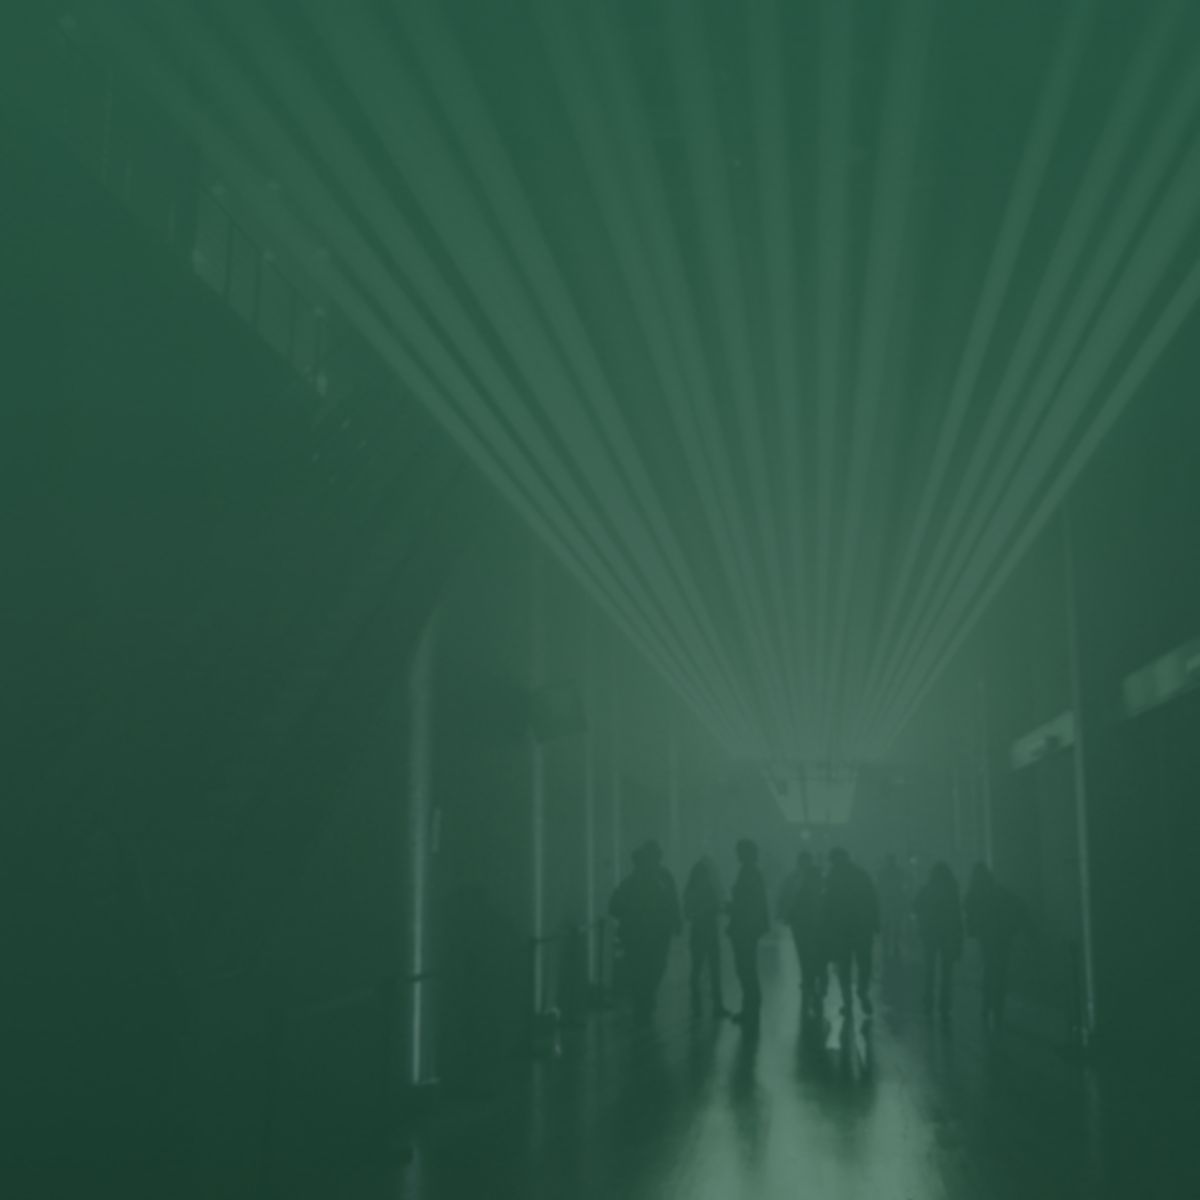 In an enclosed space with soft lighting there are groups of people standing against the light. The image has a green gradient.